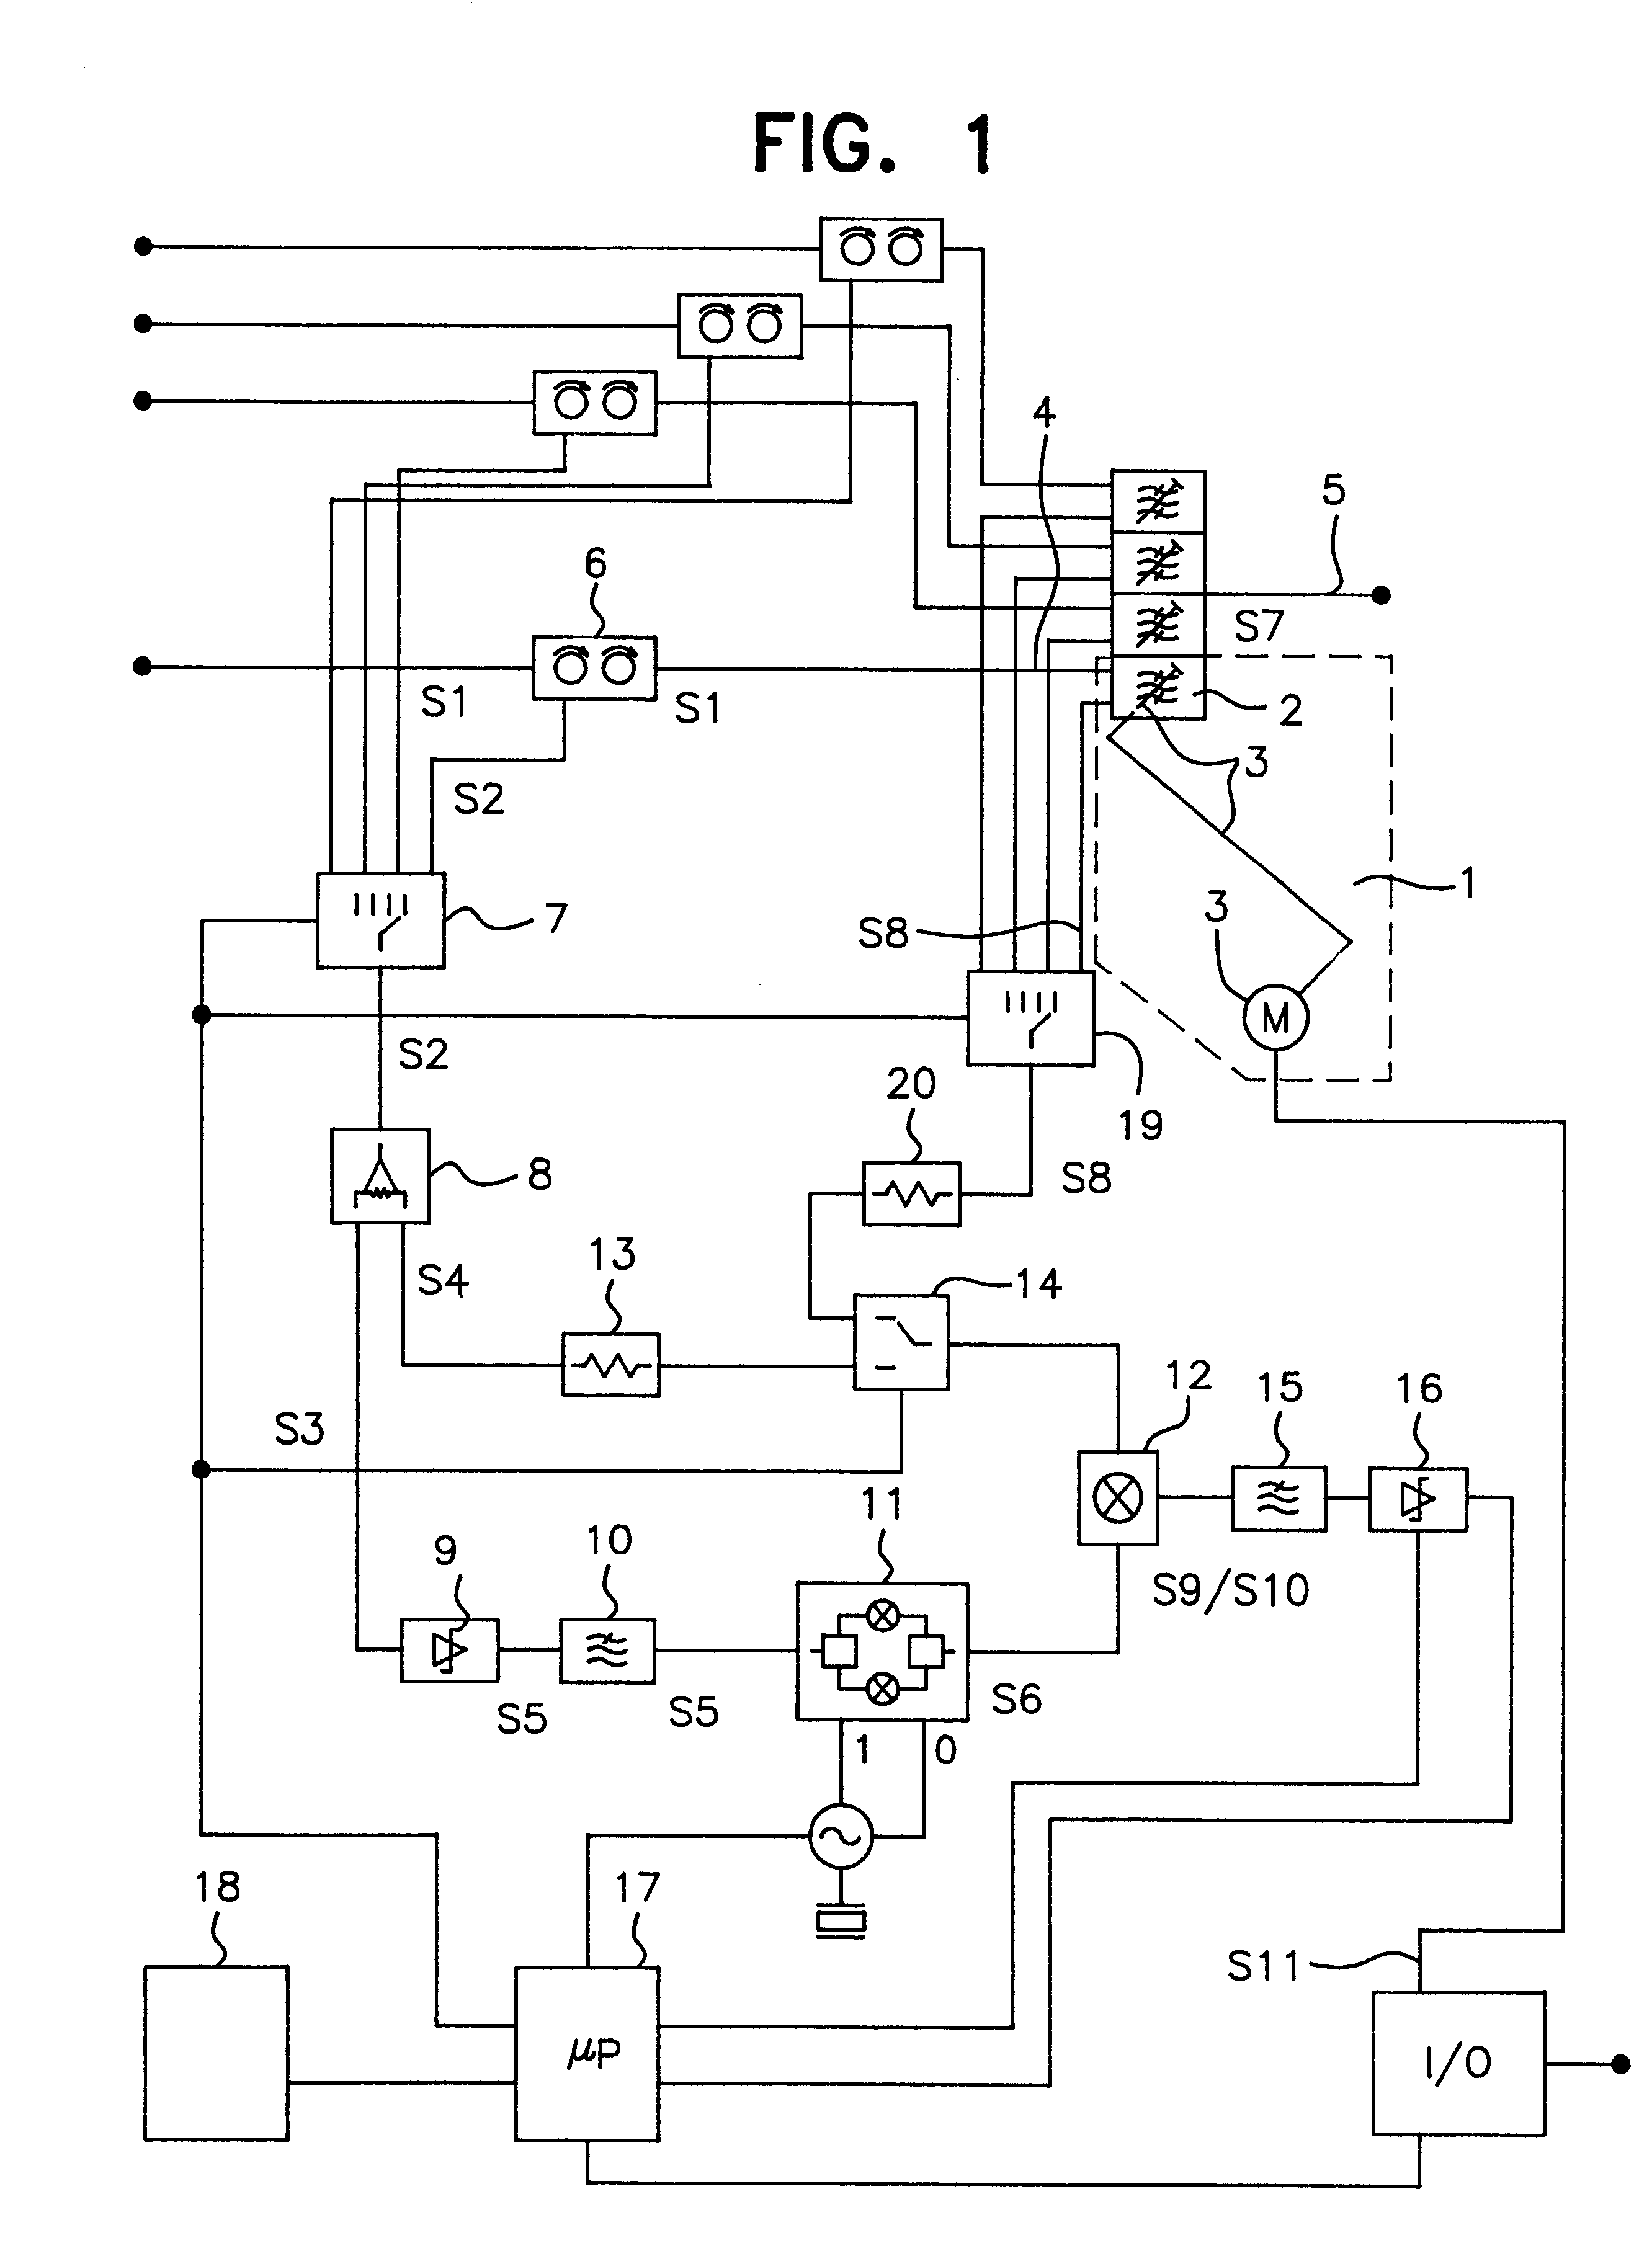 Method and system for tuning resonance modules